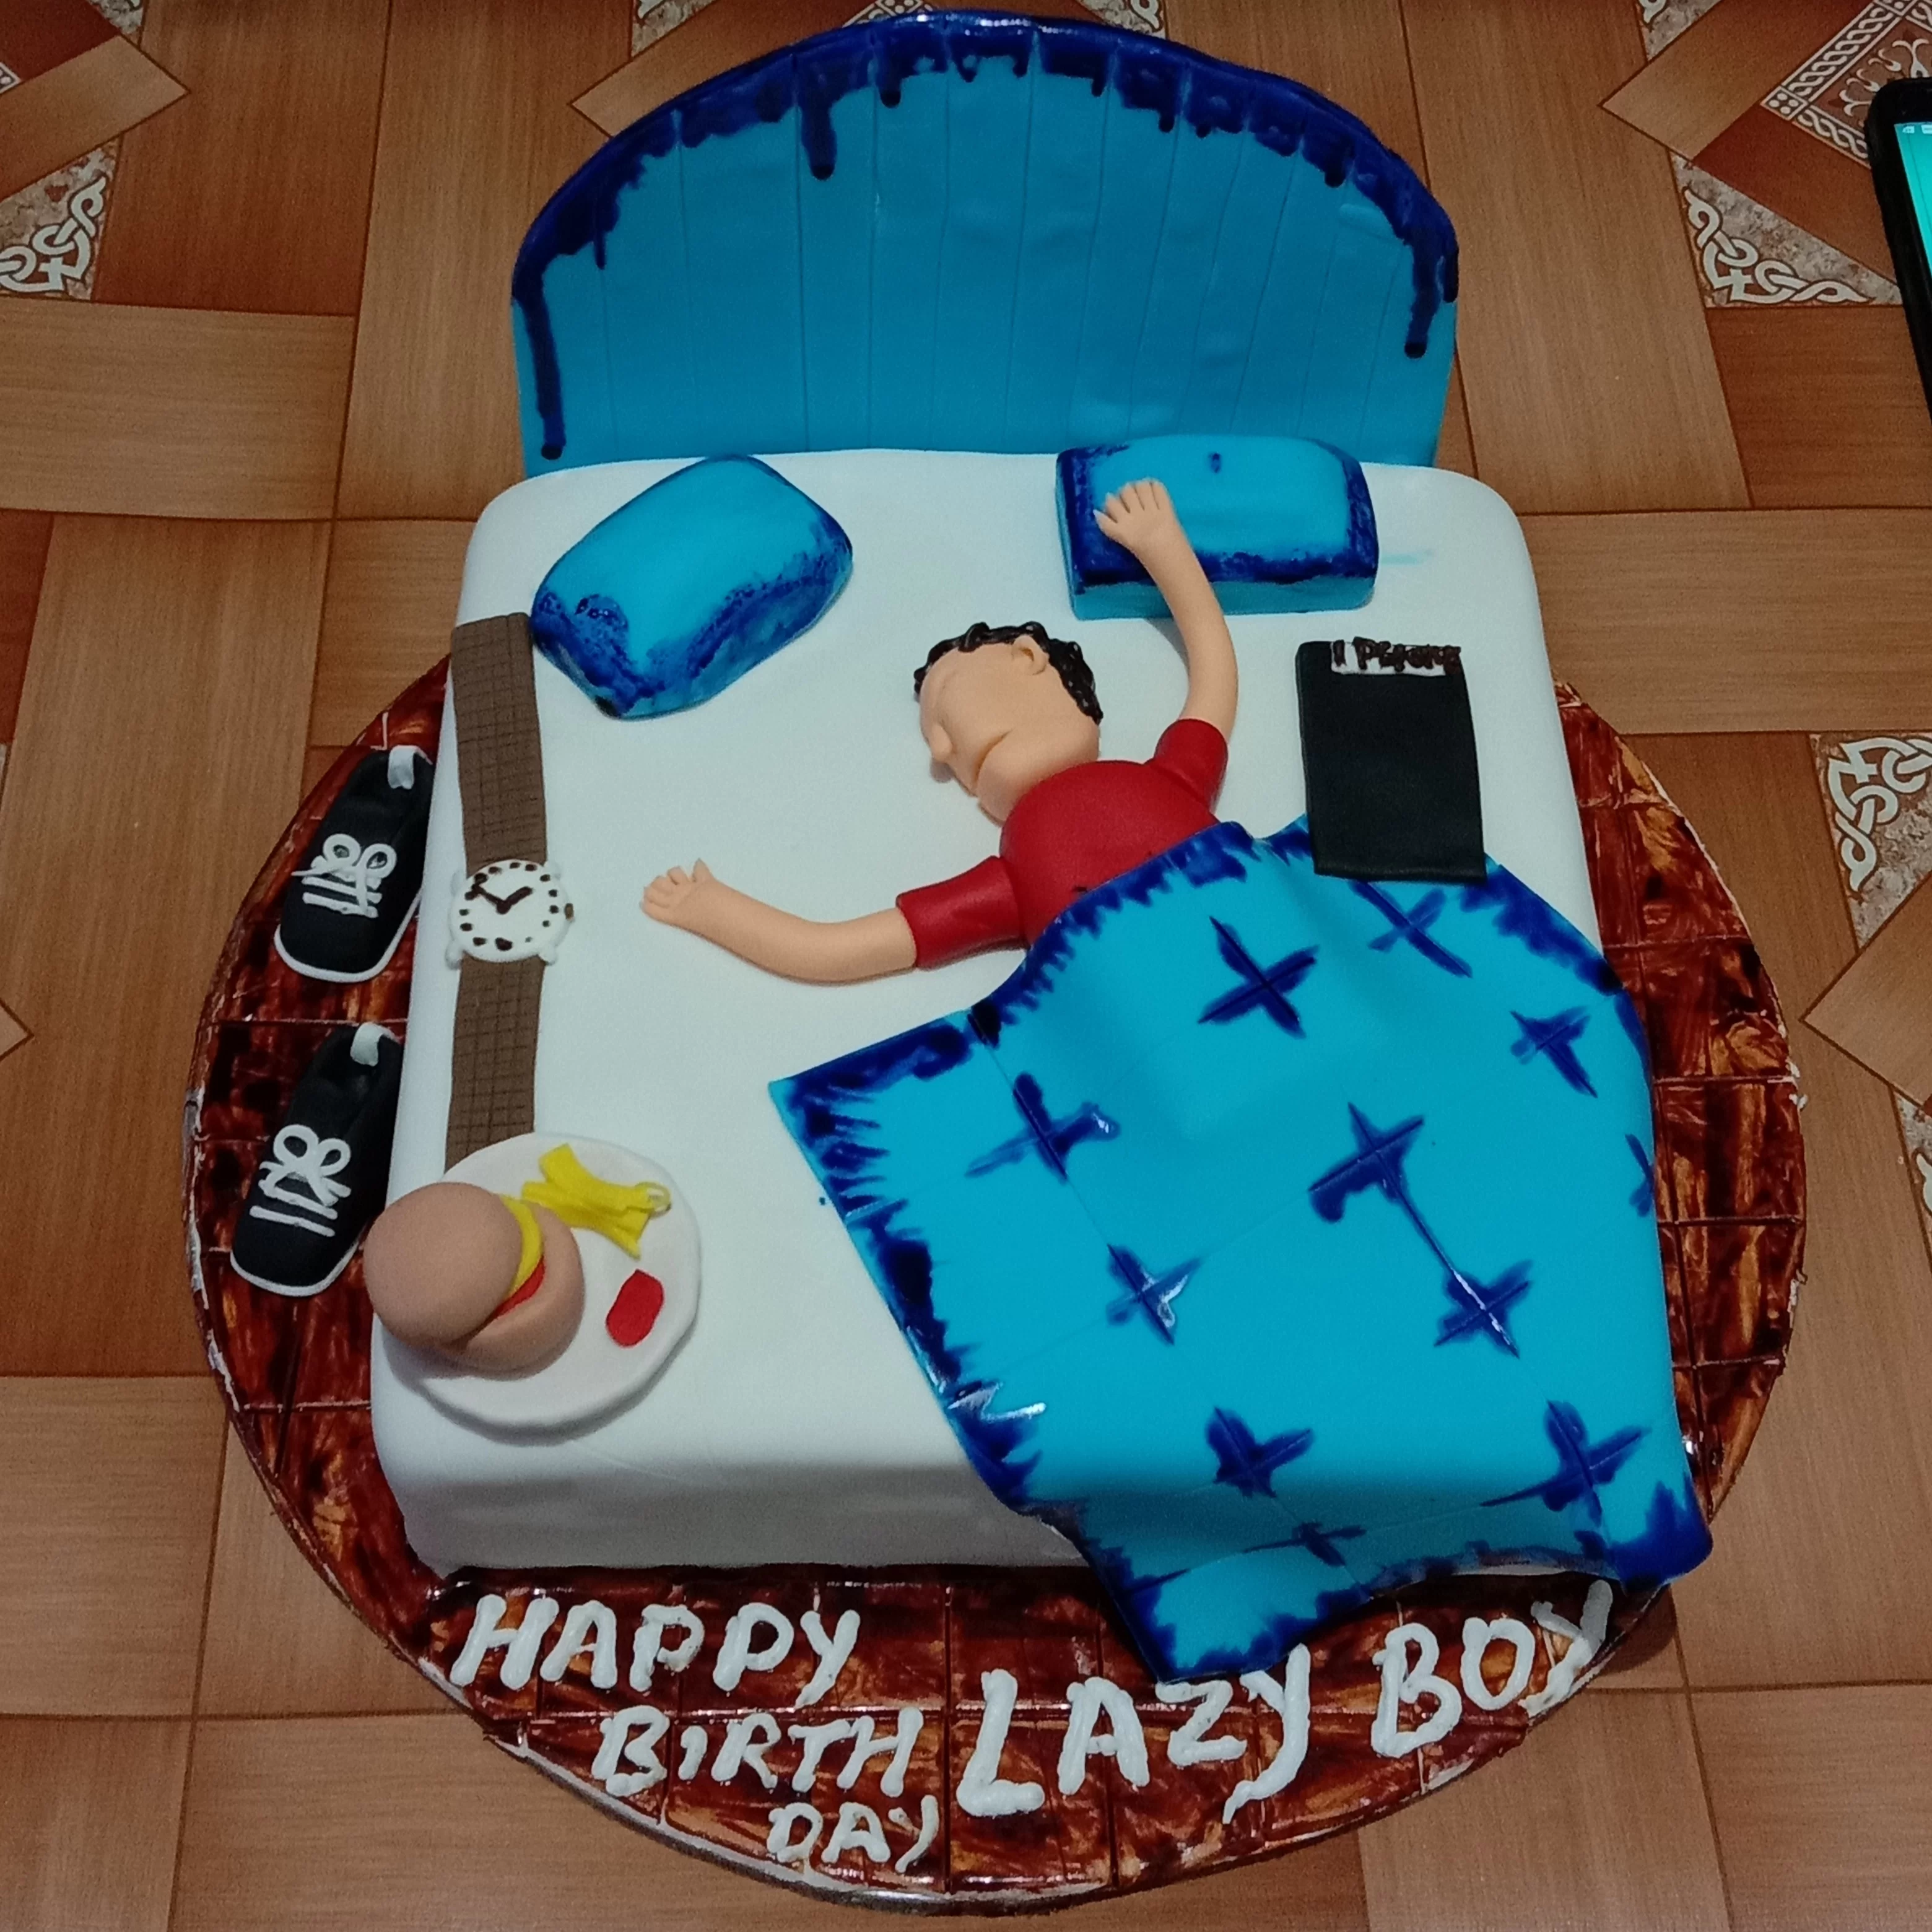 HOW TO MAKE BOY BED CAKE / LAZY TEENAGER BIRTHDAY CAKE TUTORIAL - YouTube